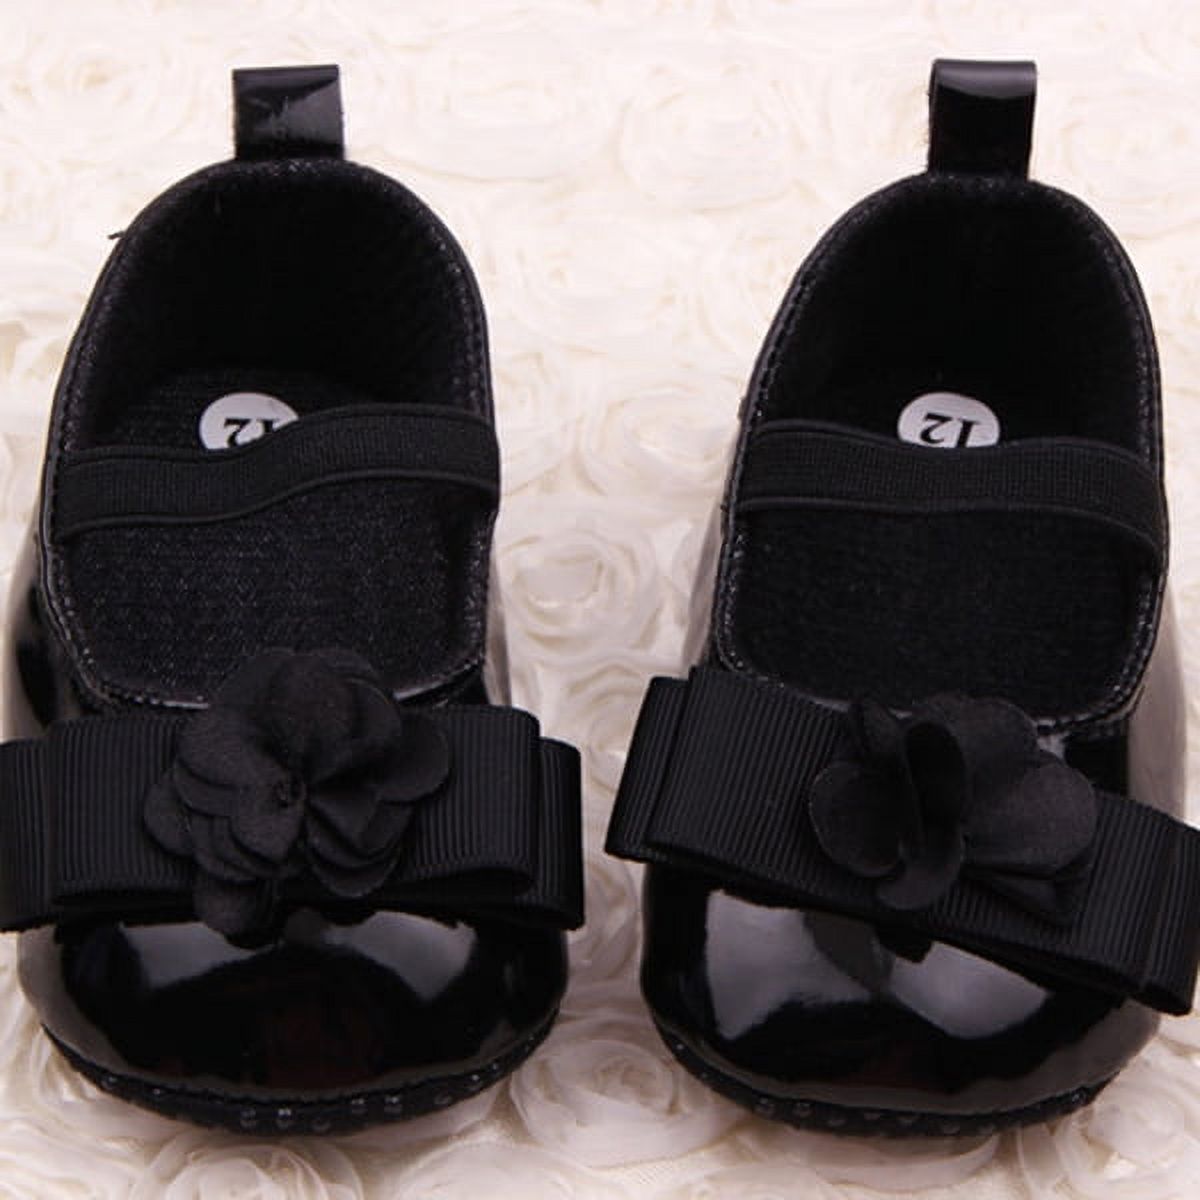 Infant Baby Girls PU Leather Princess Flower Crib Shoes Soft First Walkers - image 1 of 4